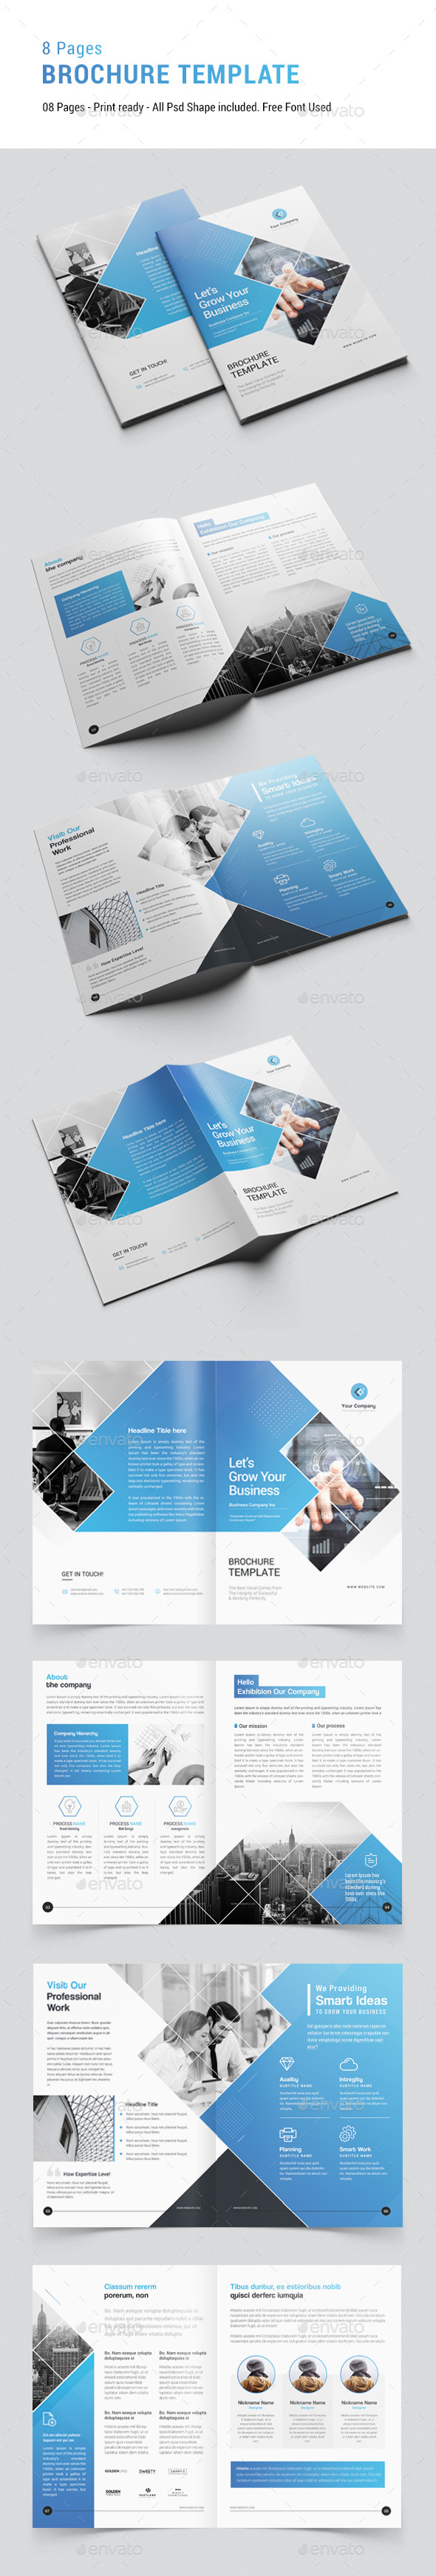 20 Pages Brochure Template Intended For Keynote Brochure Template